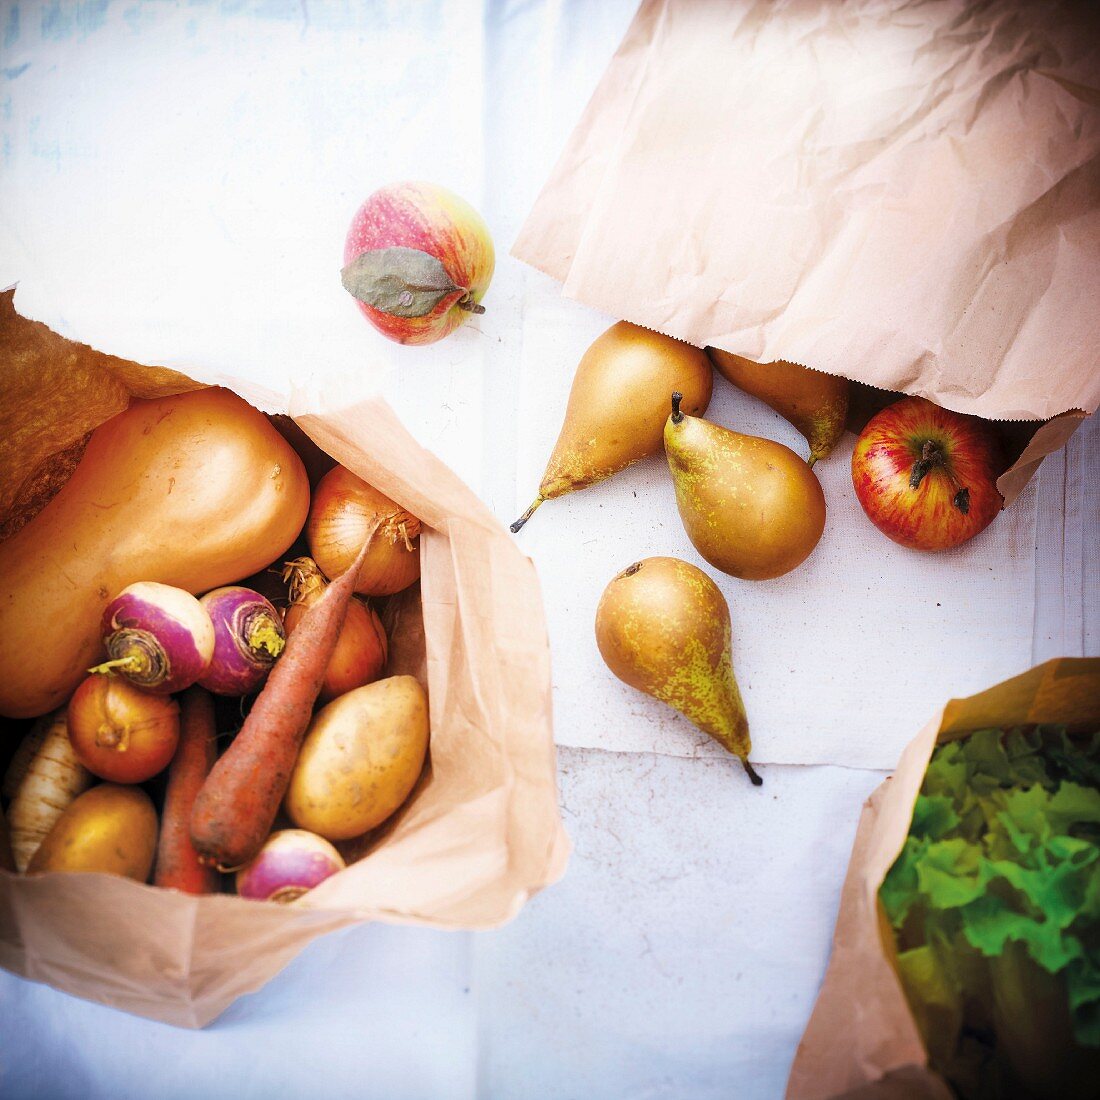 Autumn fruit and vegetables in a brown paper bag